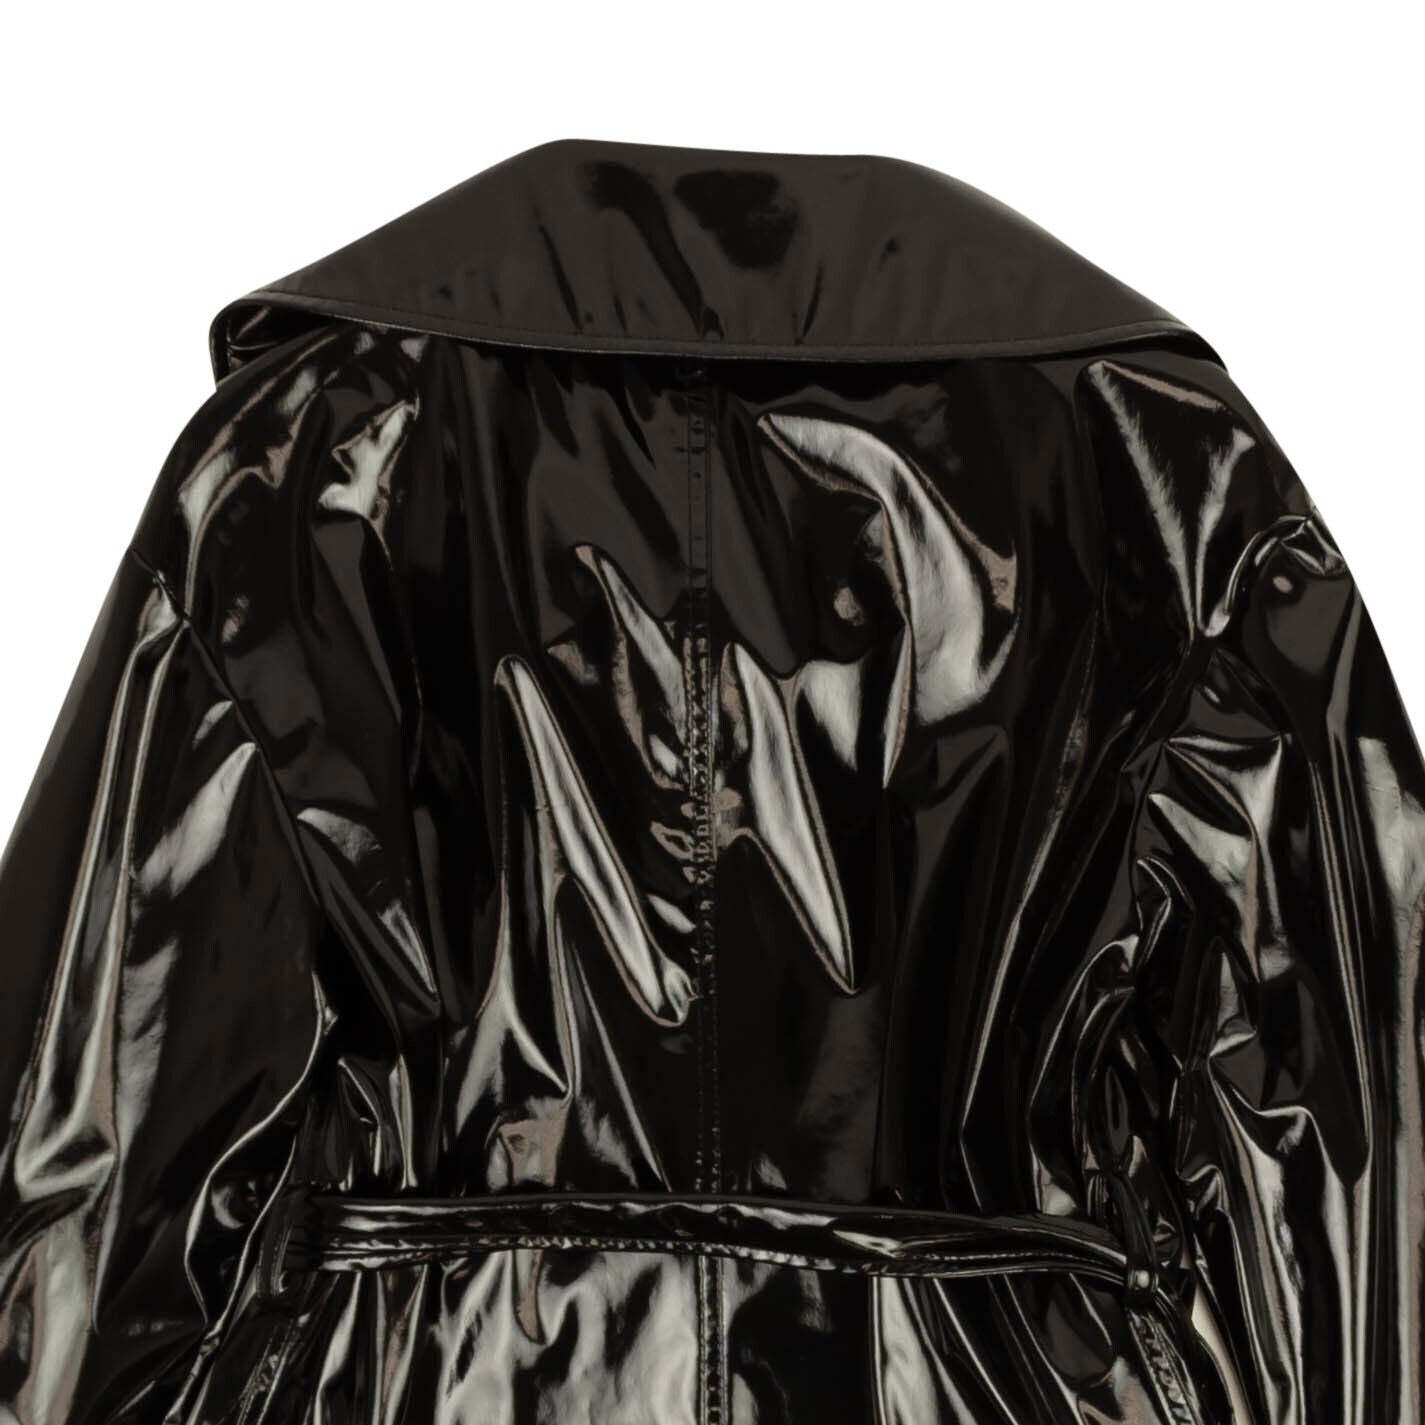 Botique Moschino Belted Patent Raincoat - Black